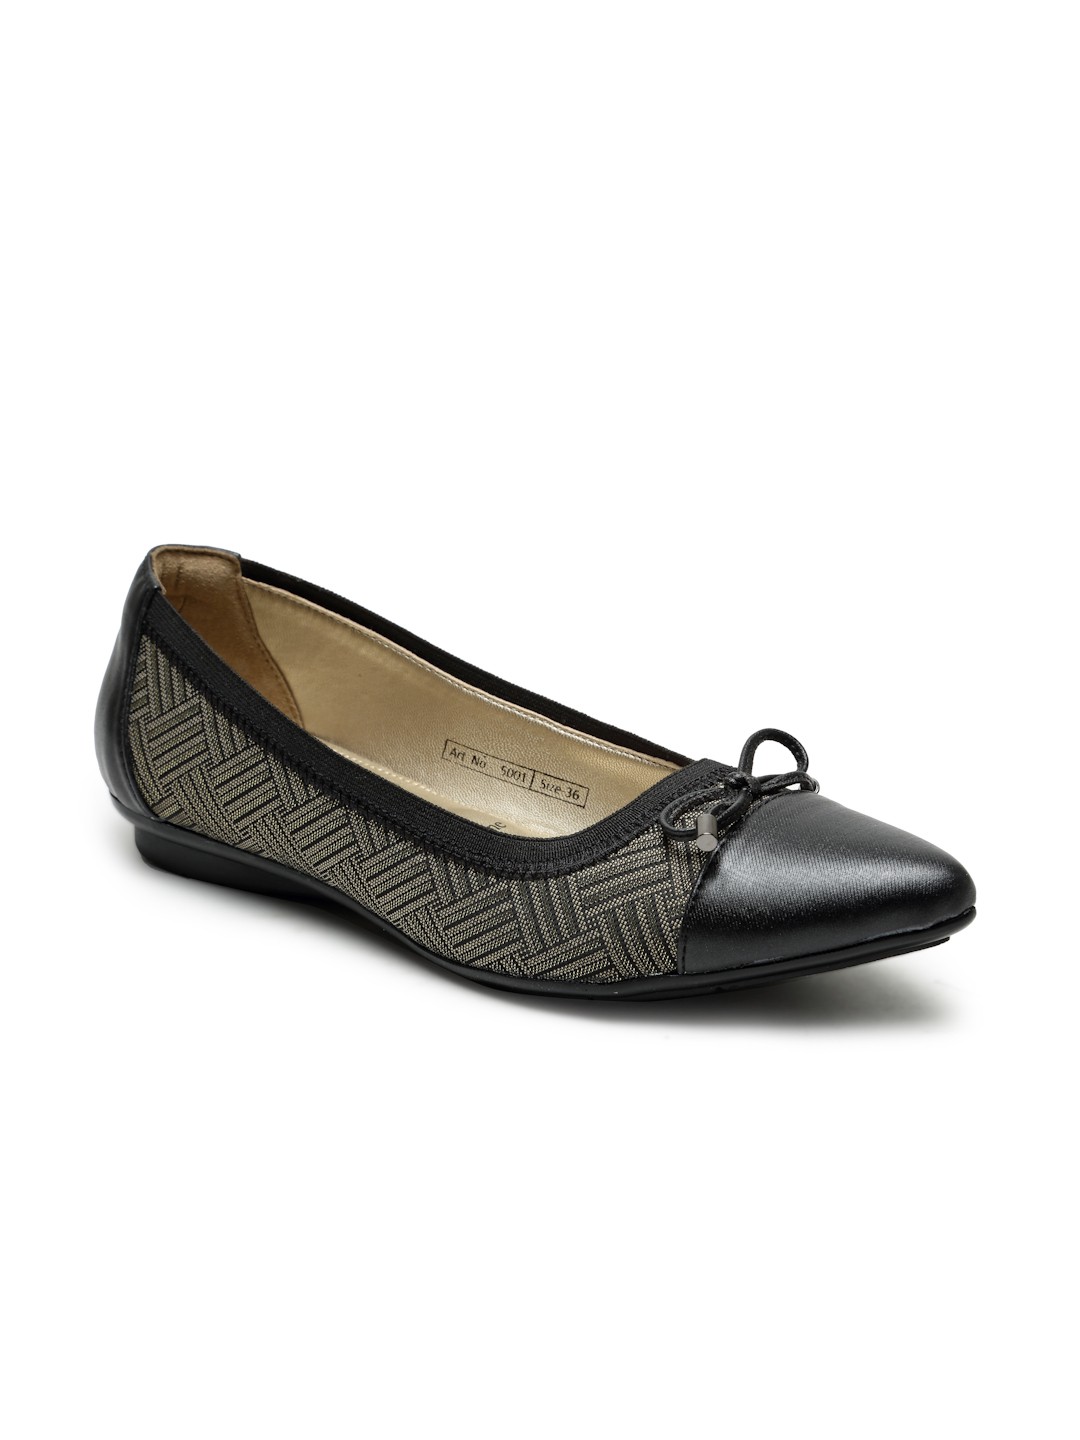 Buy Von Wellx Germany Comfort Women's Black Casual Shoes Lisa Online in Faridabad